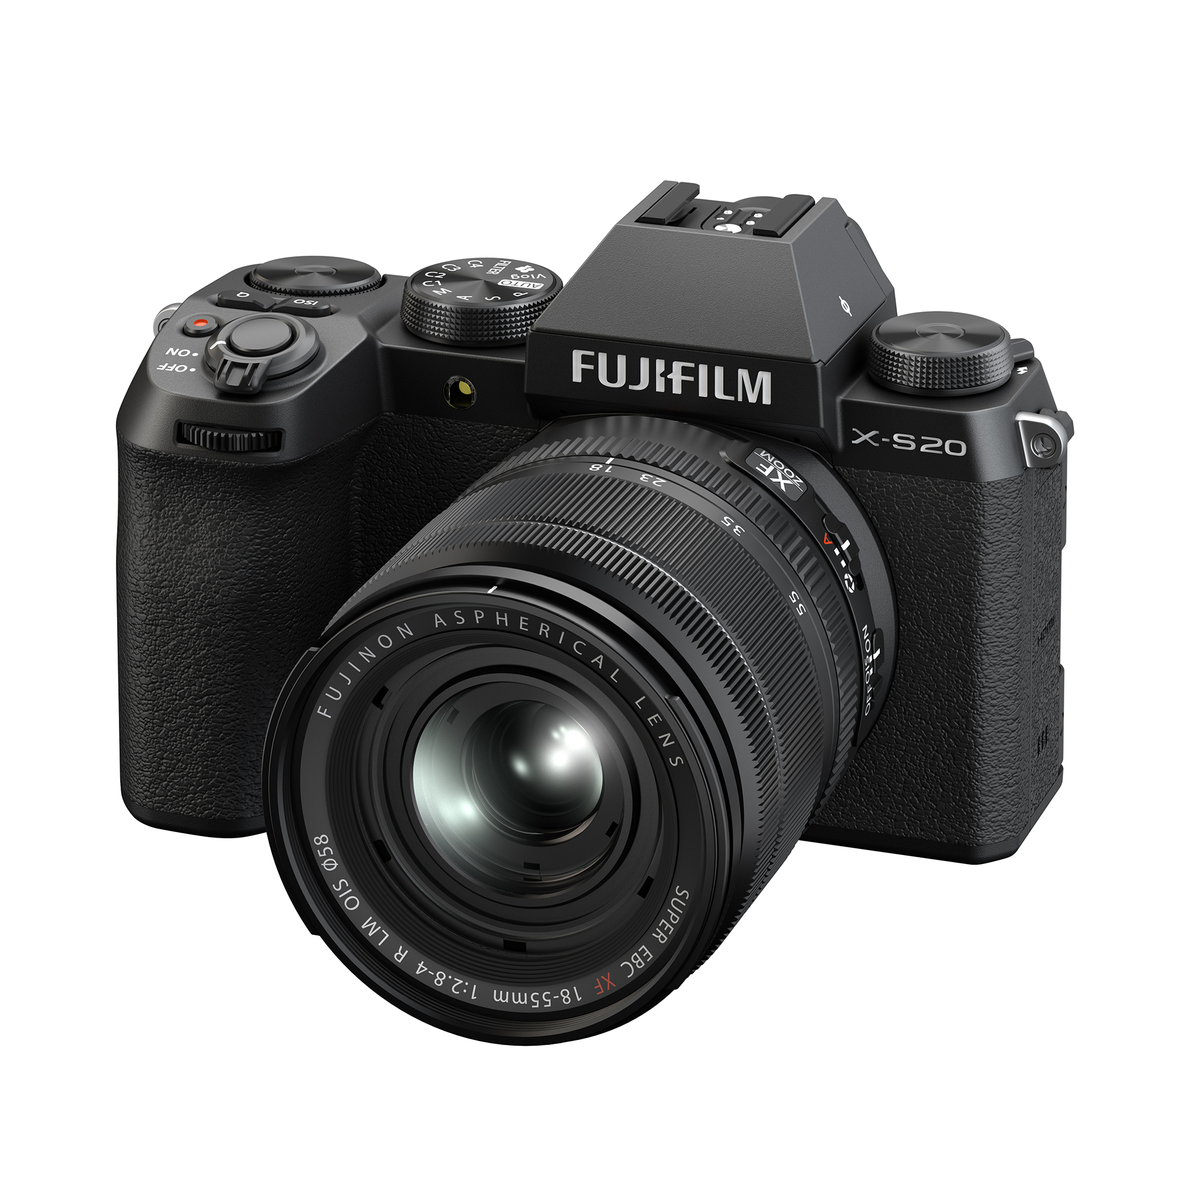 Tiny But Mighty: We Review the Fujifilm X-S20 Mirrorless Camera